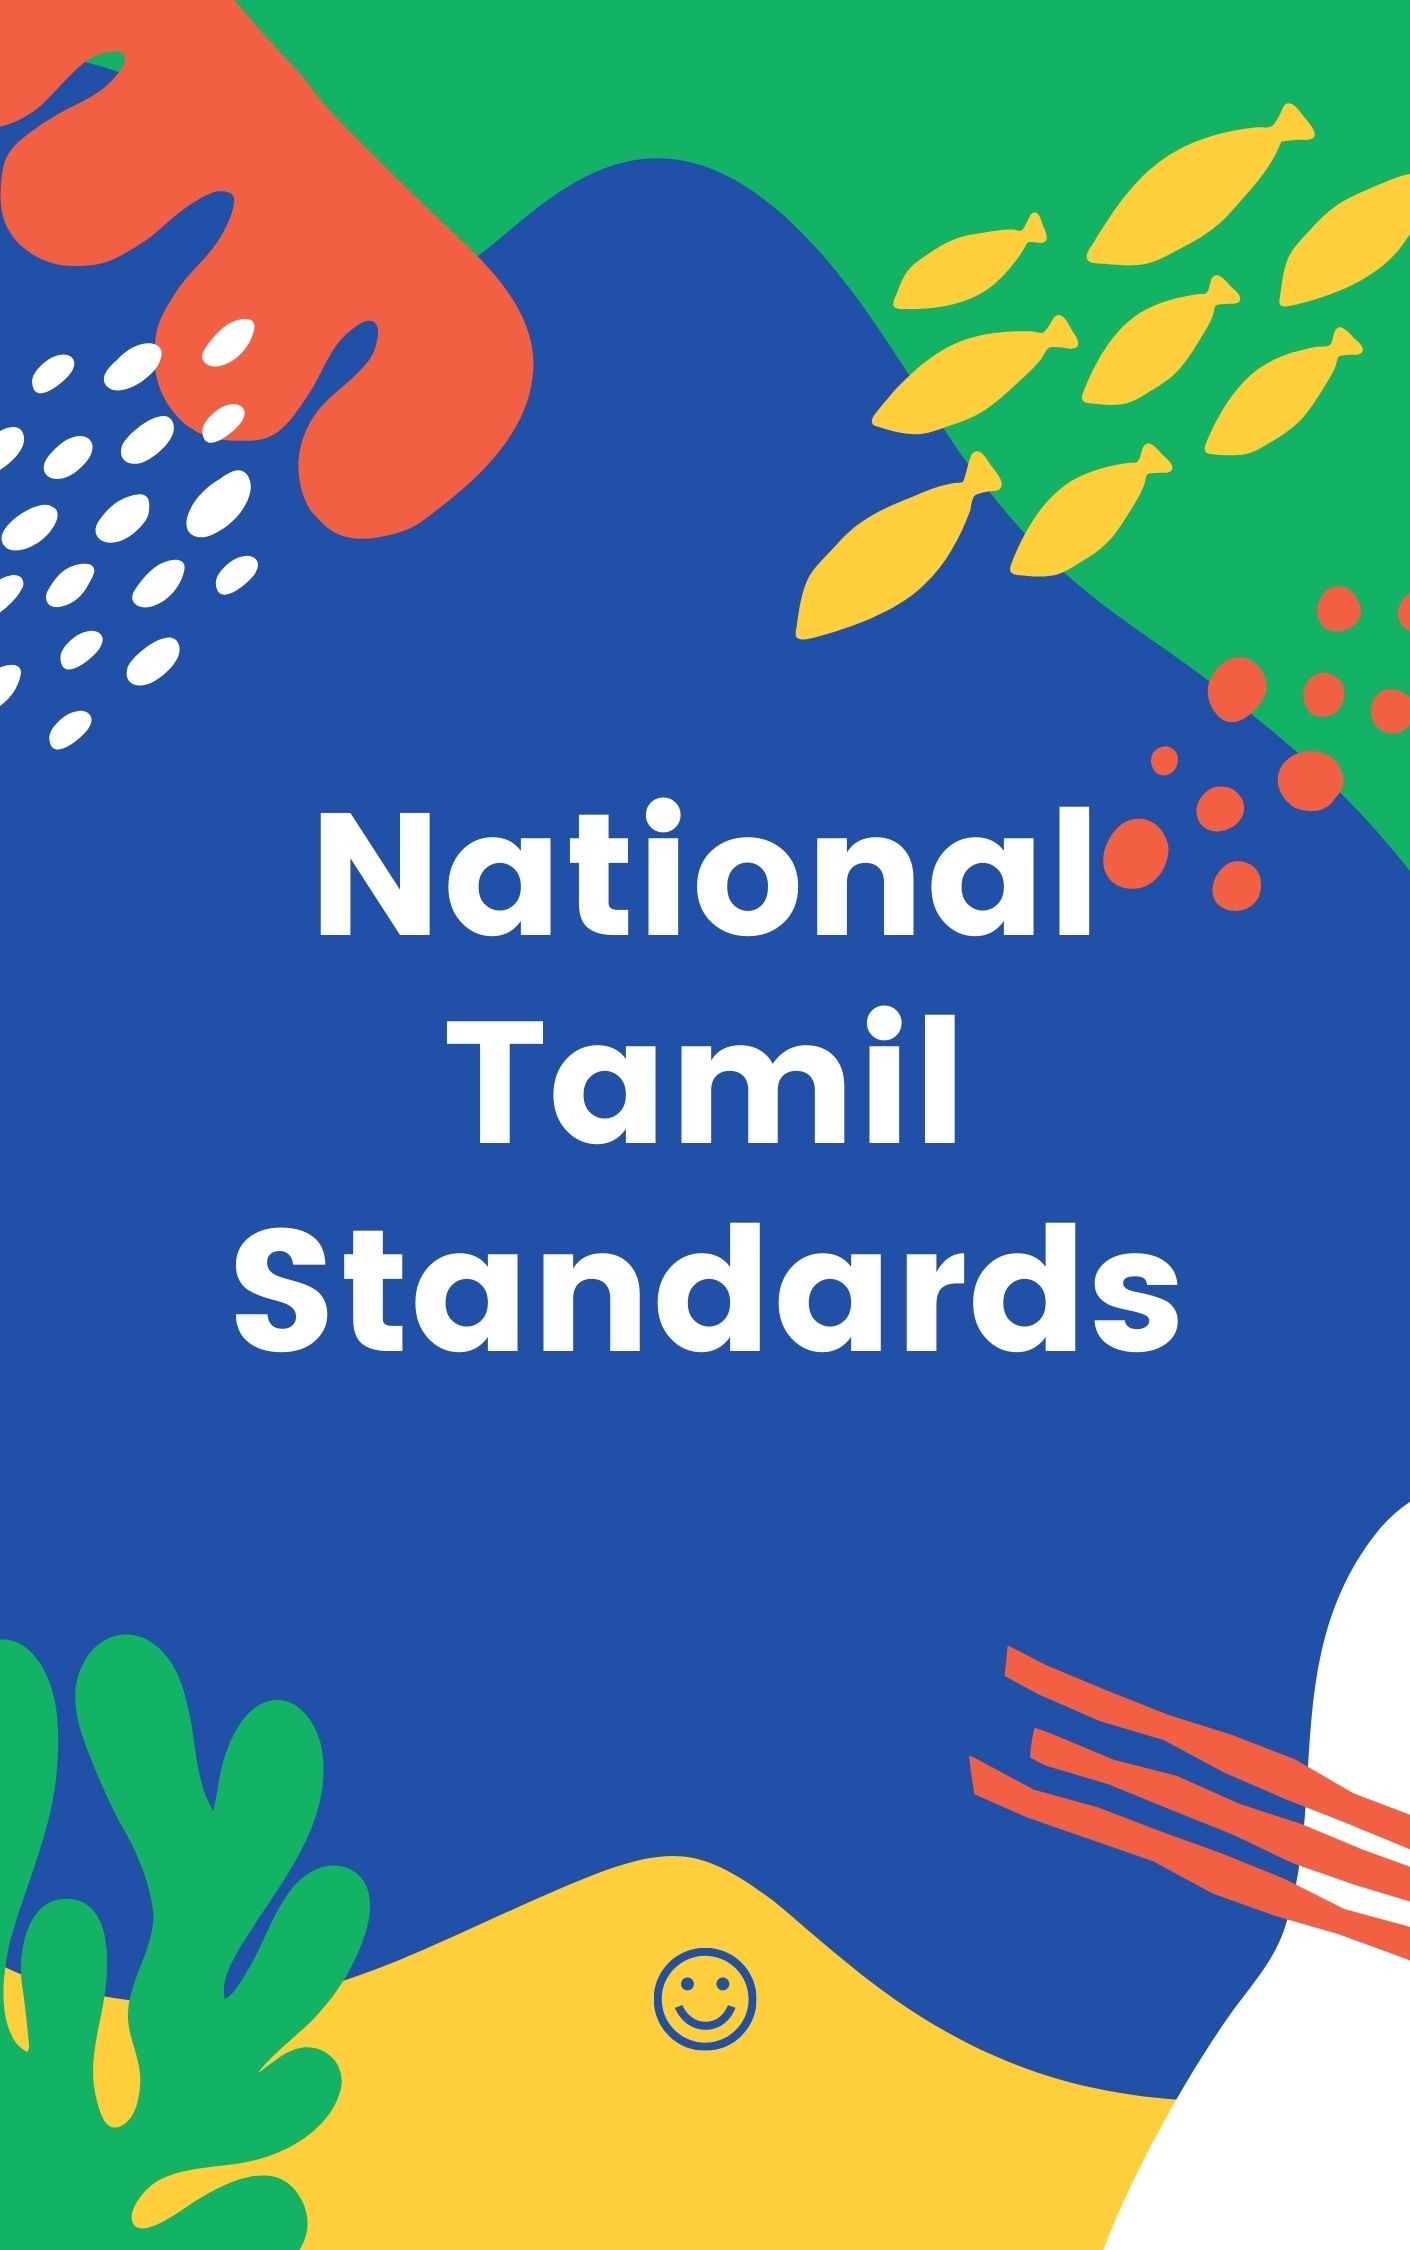 National Tamil Standards were rated as ‘Approve with Minimal Changes’, a proud moment for all of us.